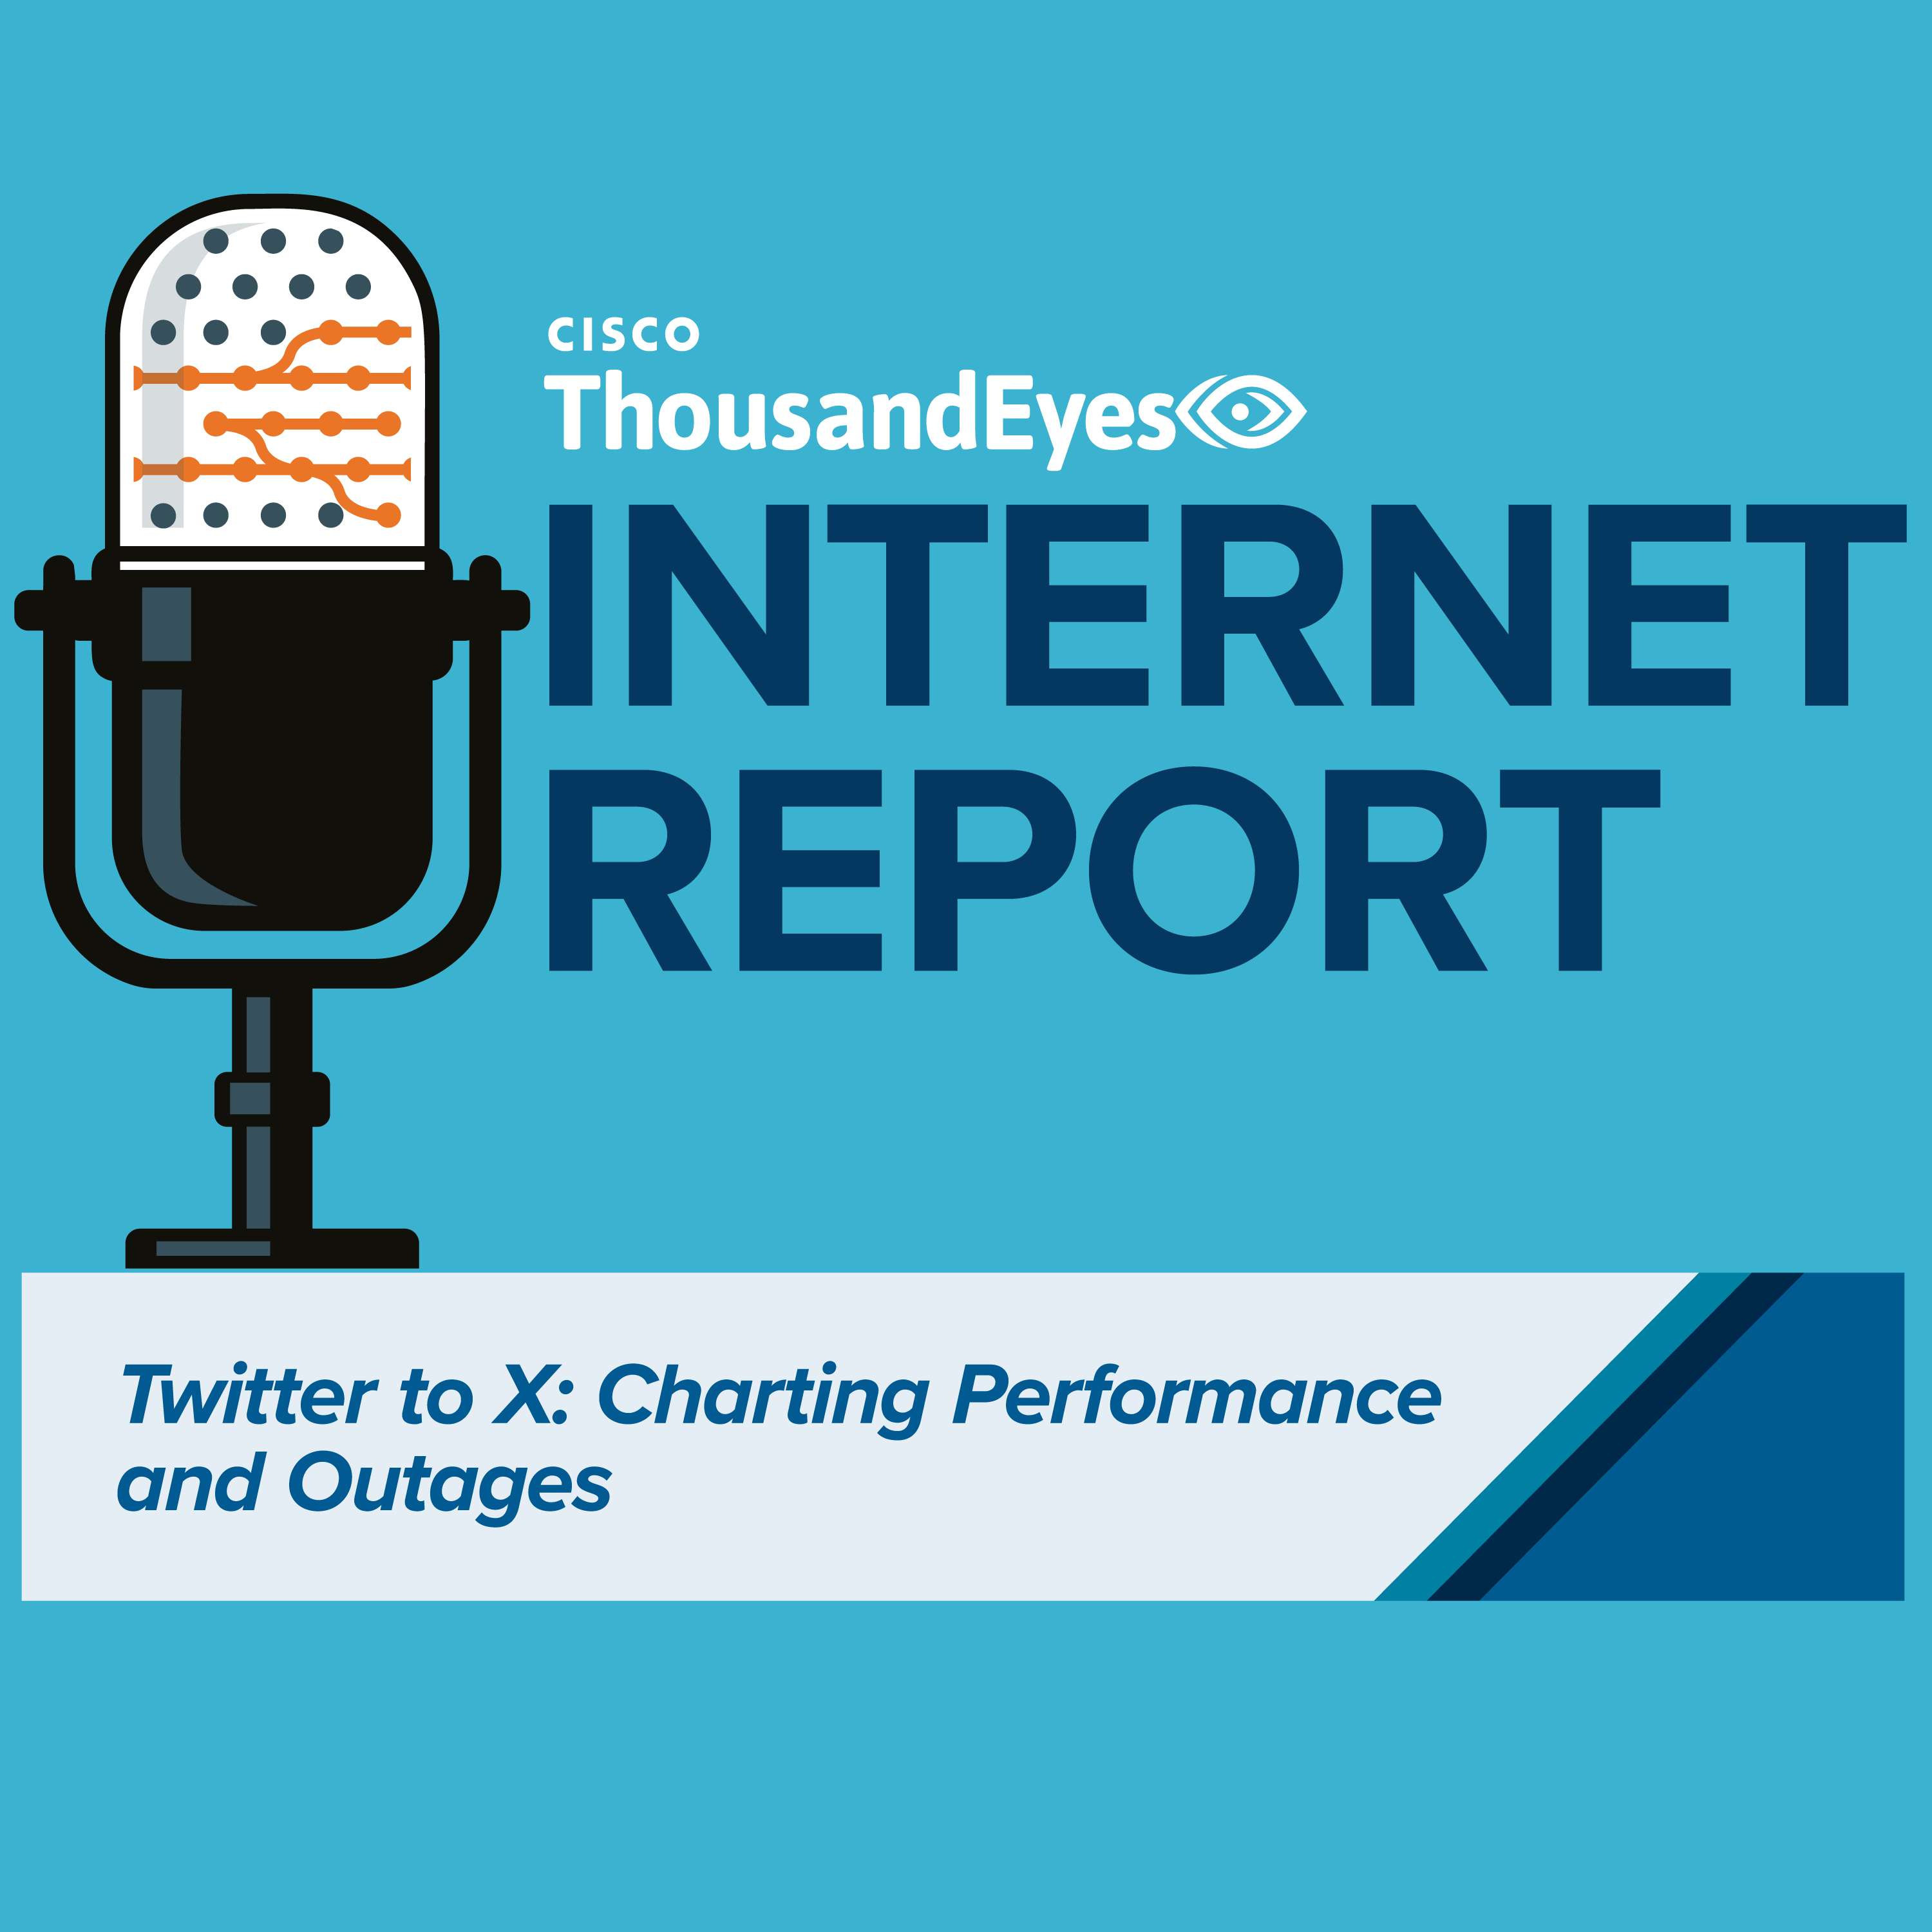 Twitter to X: Charting Performance and Outages